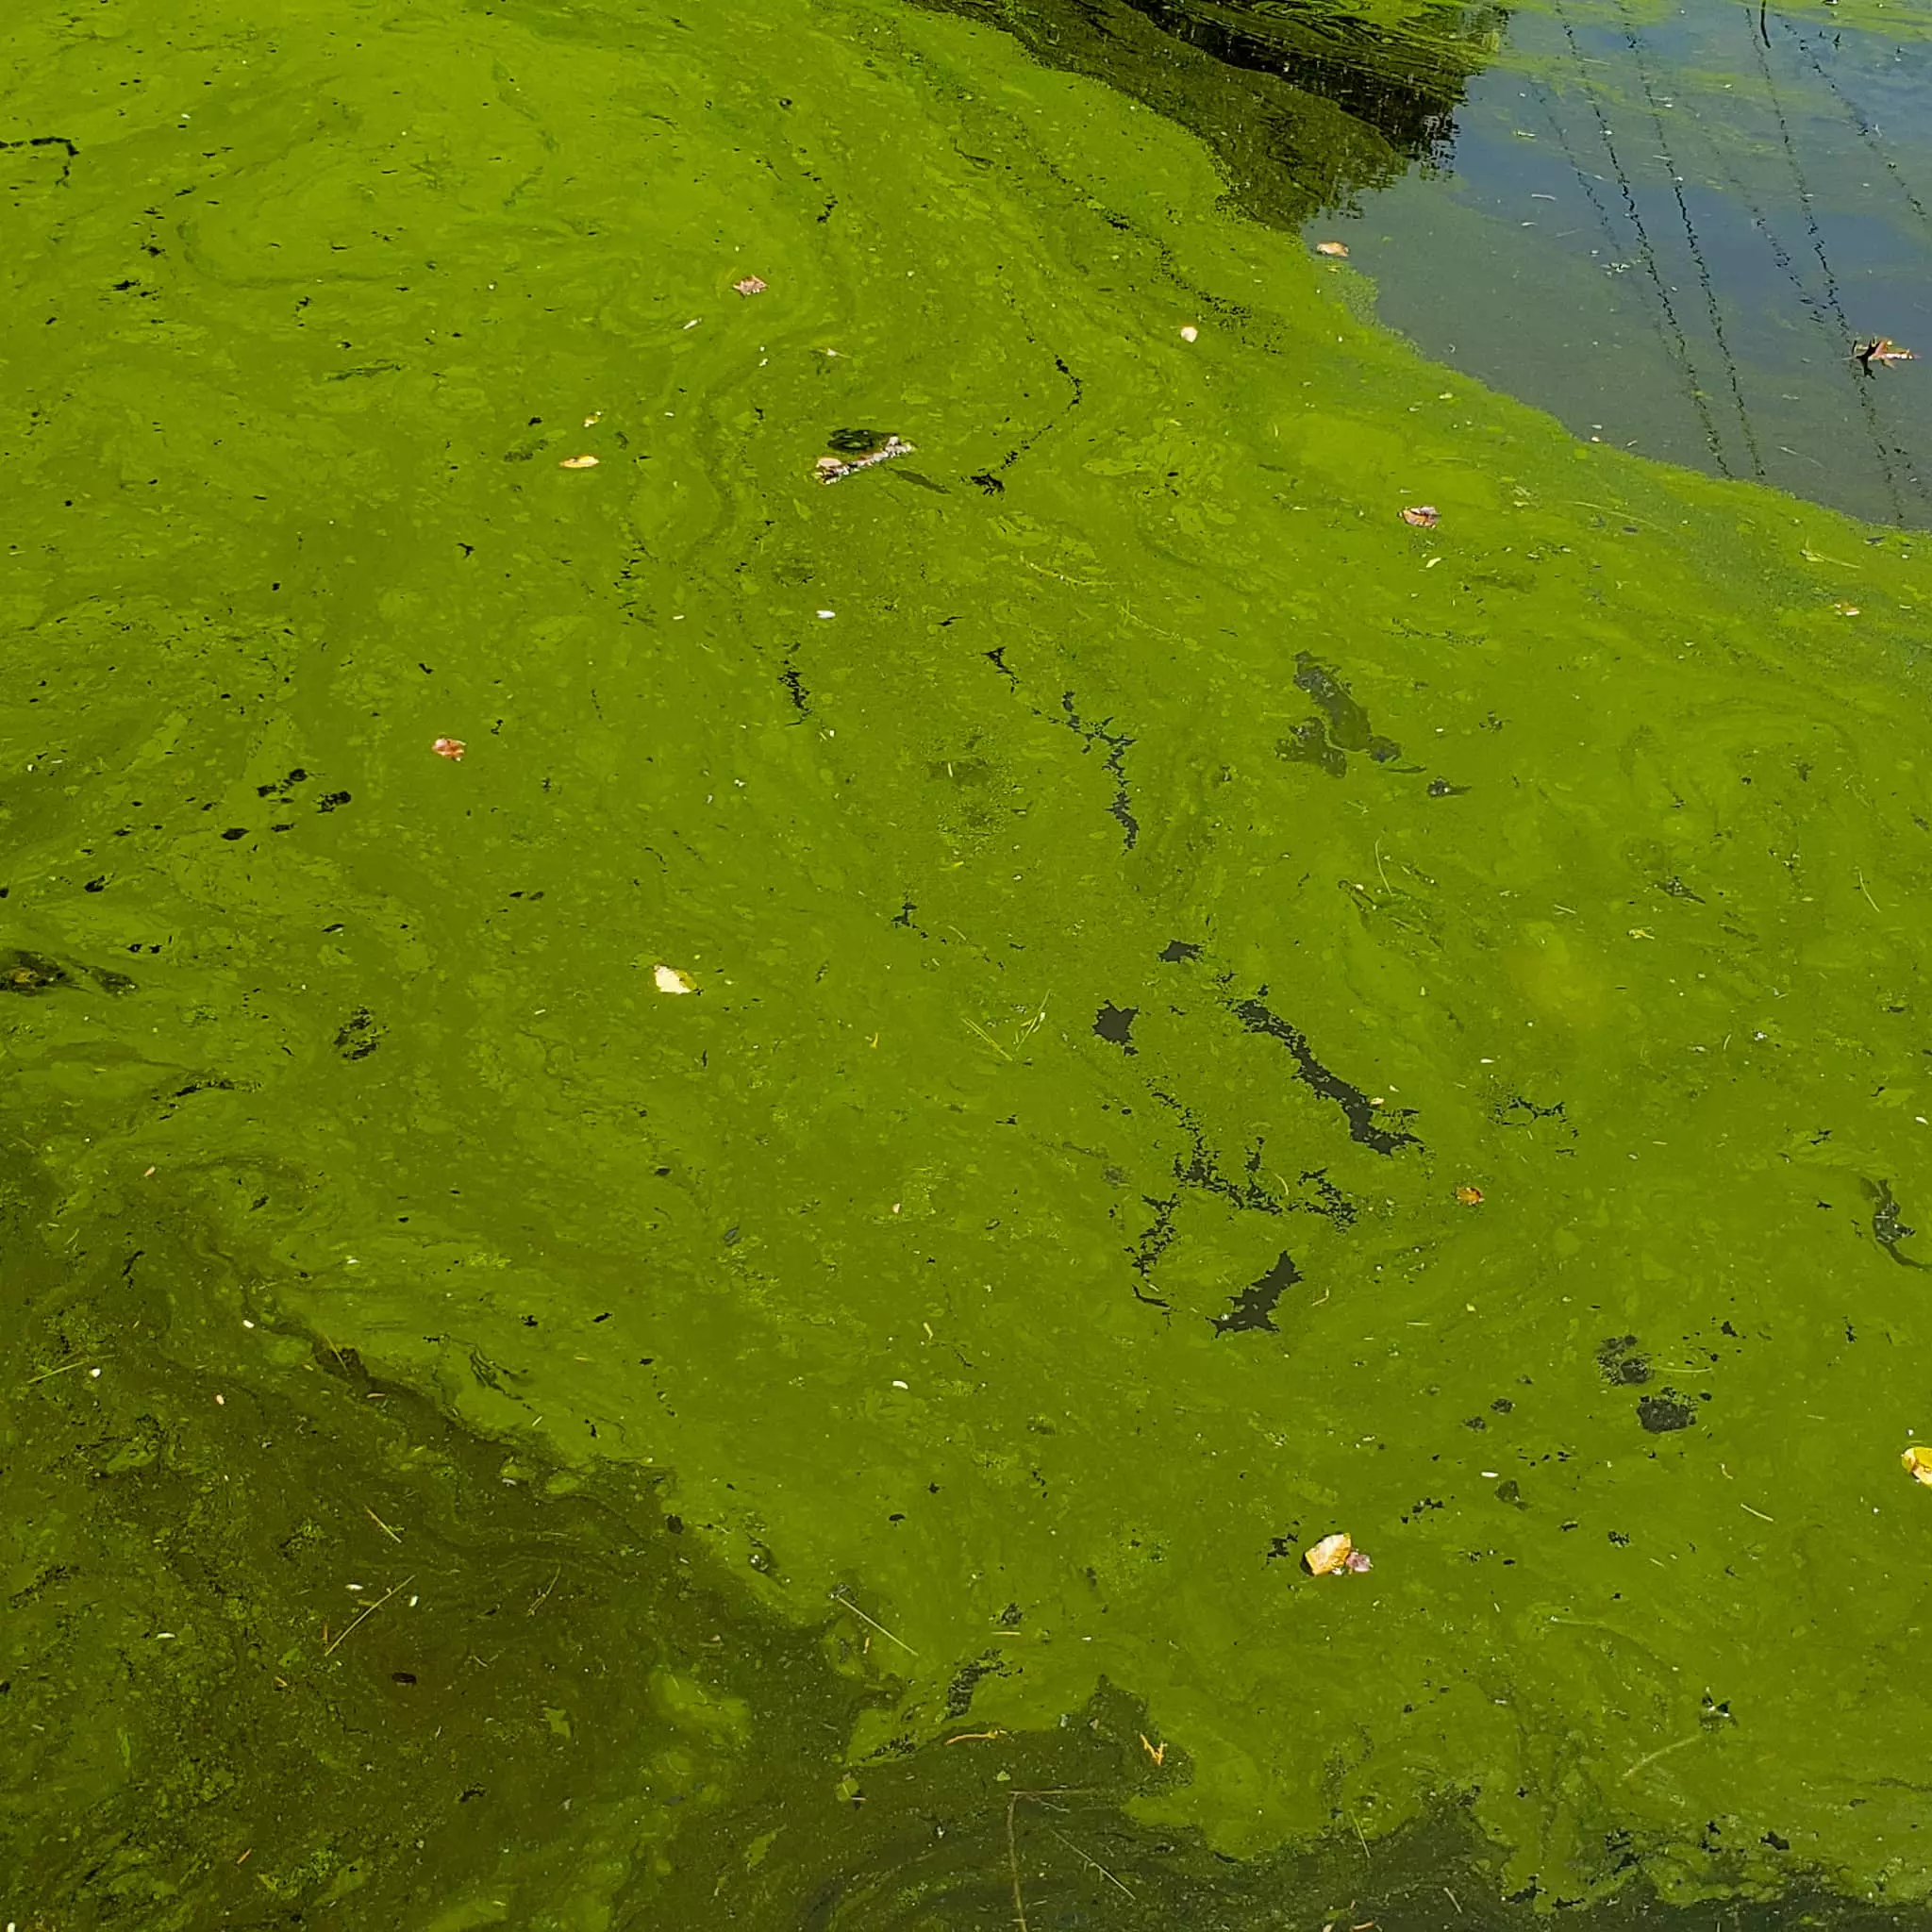 A bright green film on a water surface.